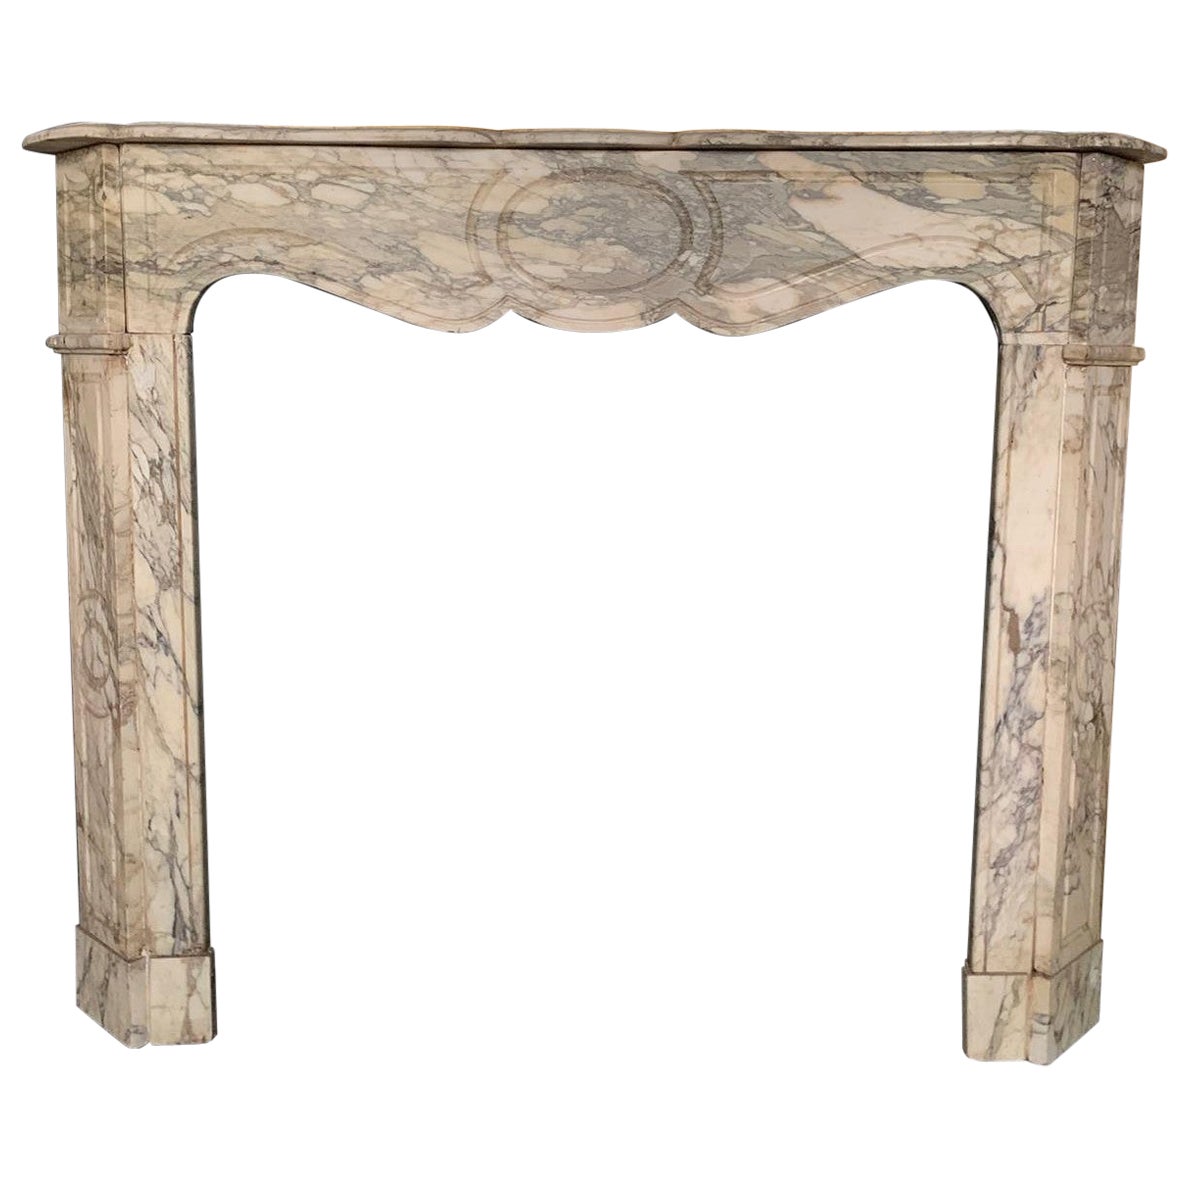 French Fireplace Mantle Pompadour in "Calacatta Carrara" Marble, 19th Century